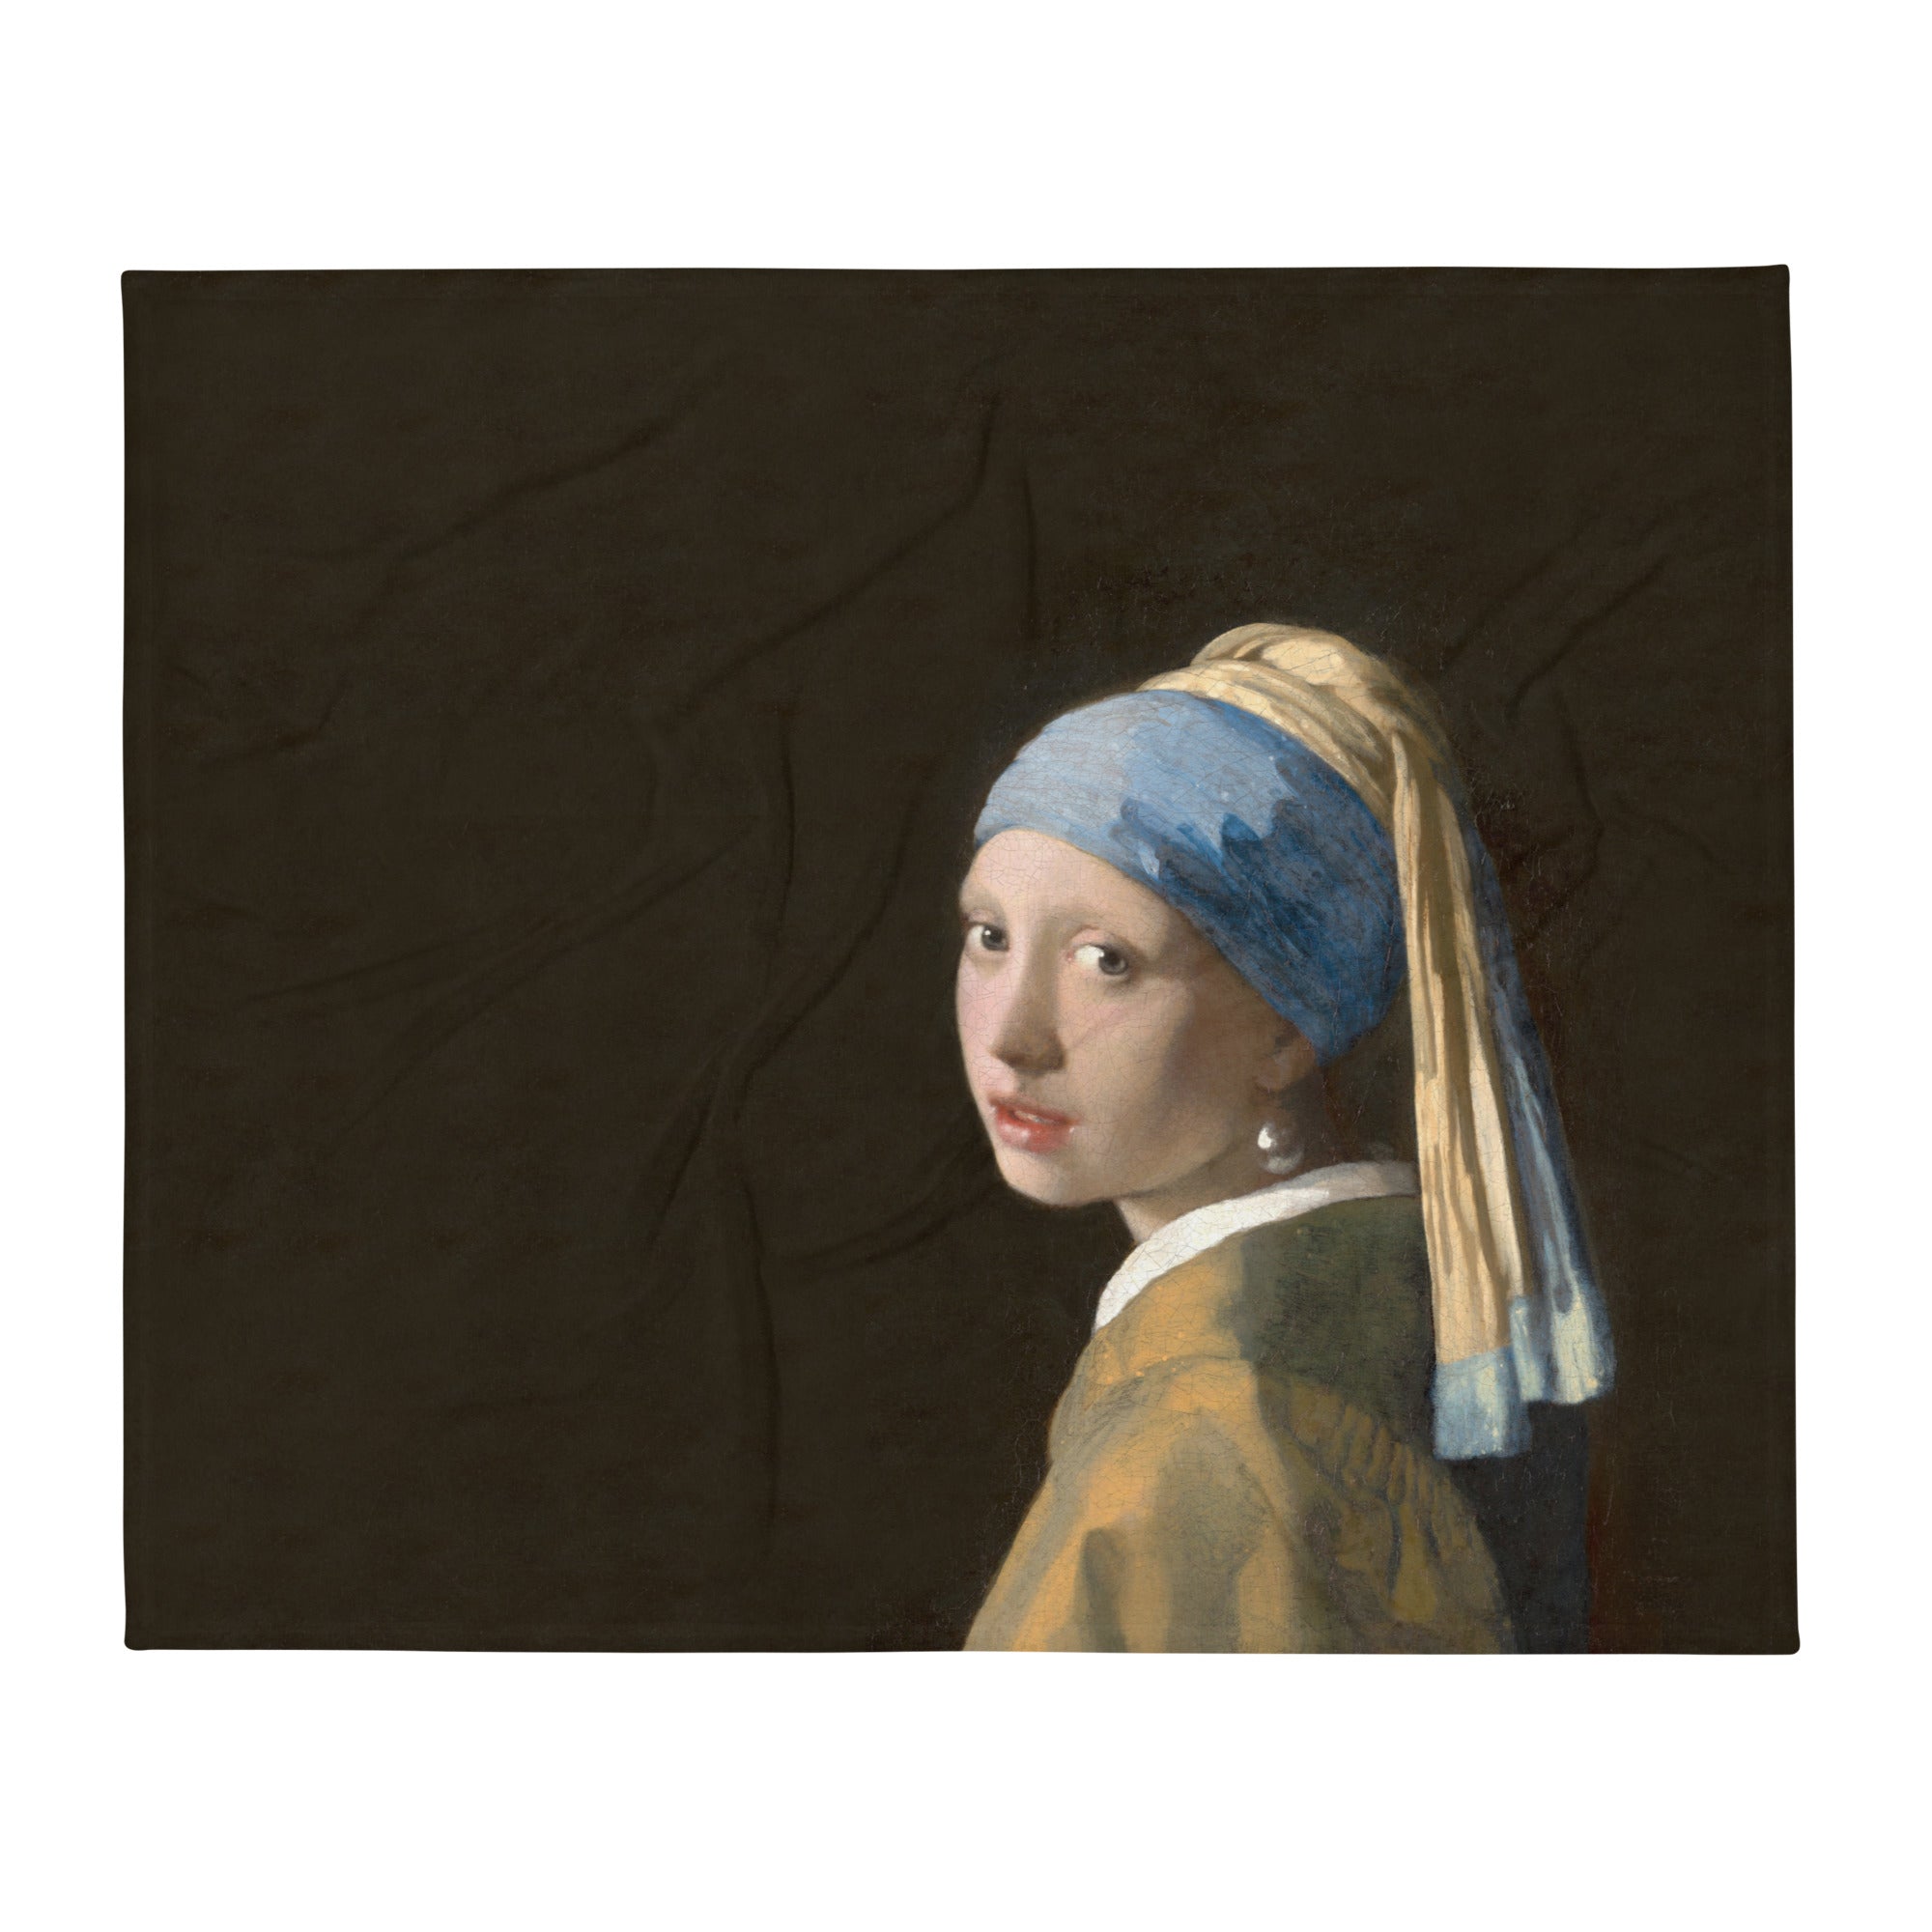 Johannes Vermeer 'Girl with a Pearl Earring' Famous Painting Throw Blanket Horizontal | Premium Art Throw